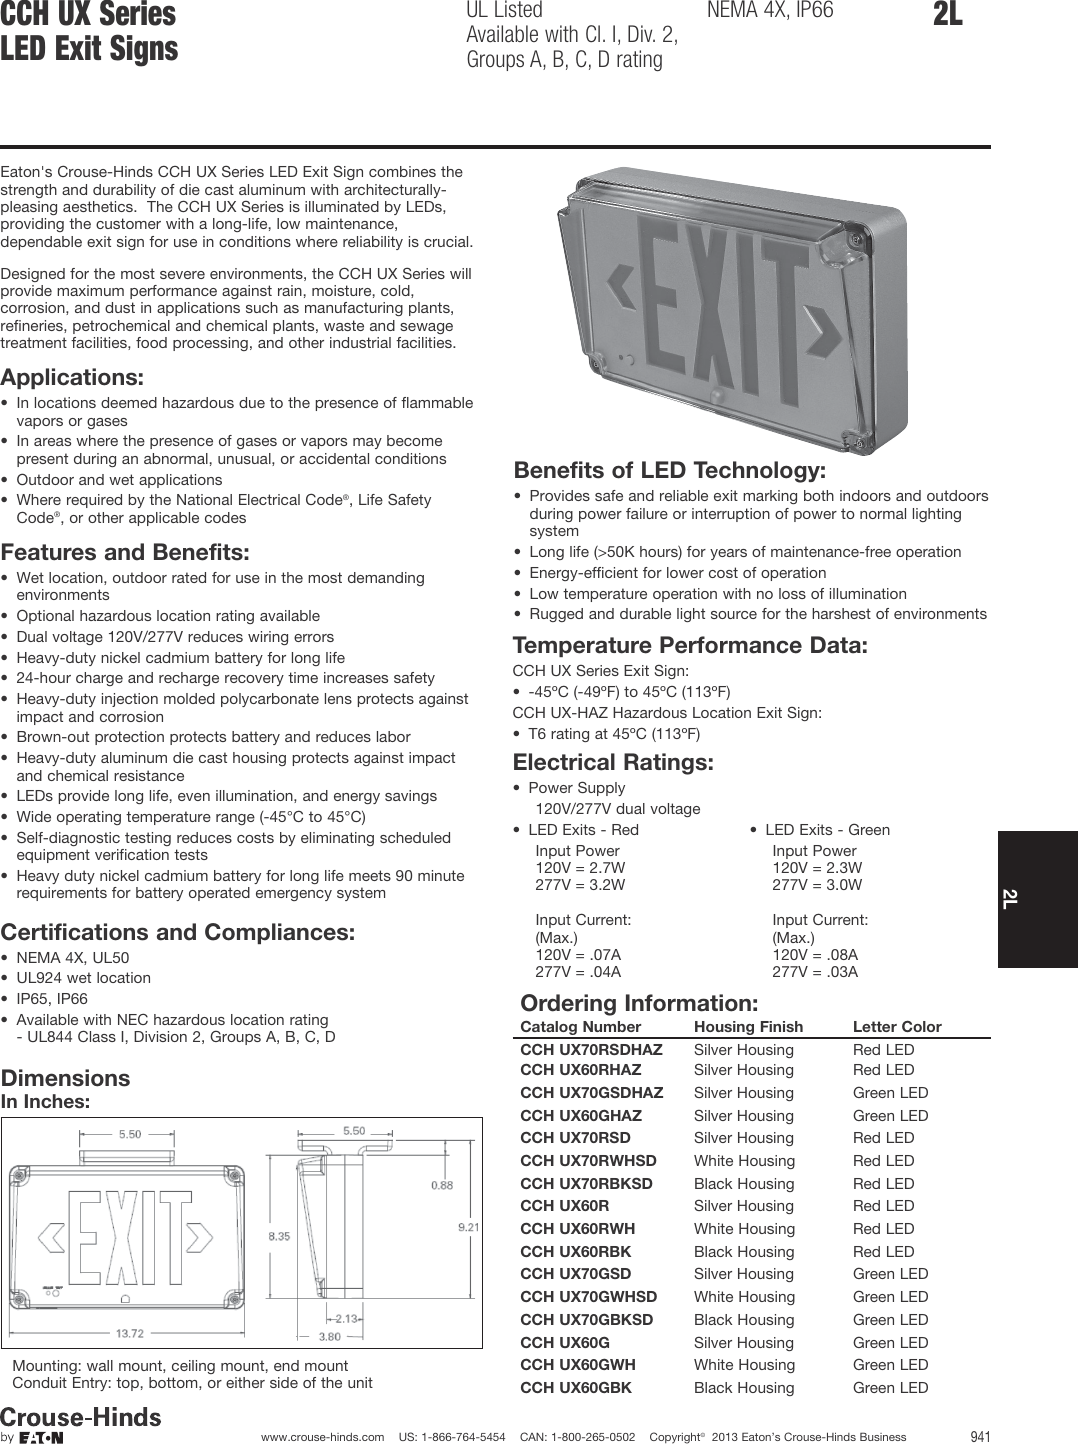 Page 1 of 1 - Cchux-led-exit-sign-2l  129135-Catalog